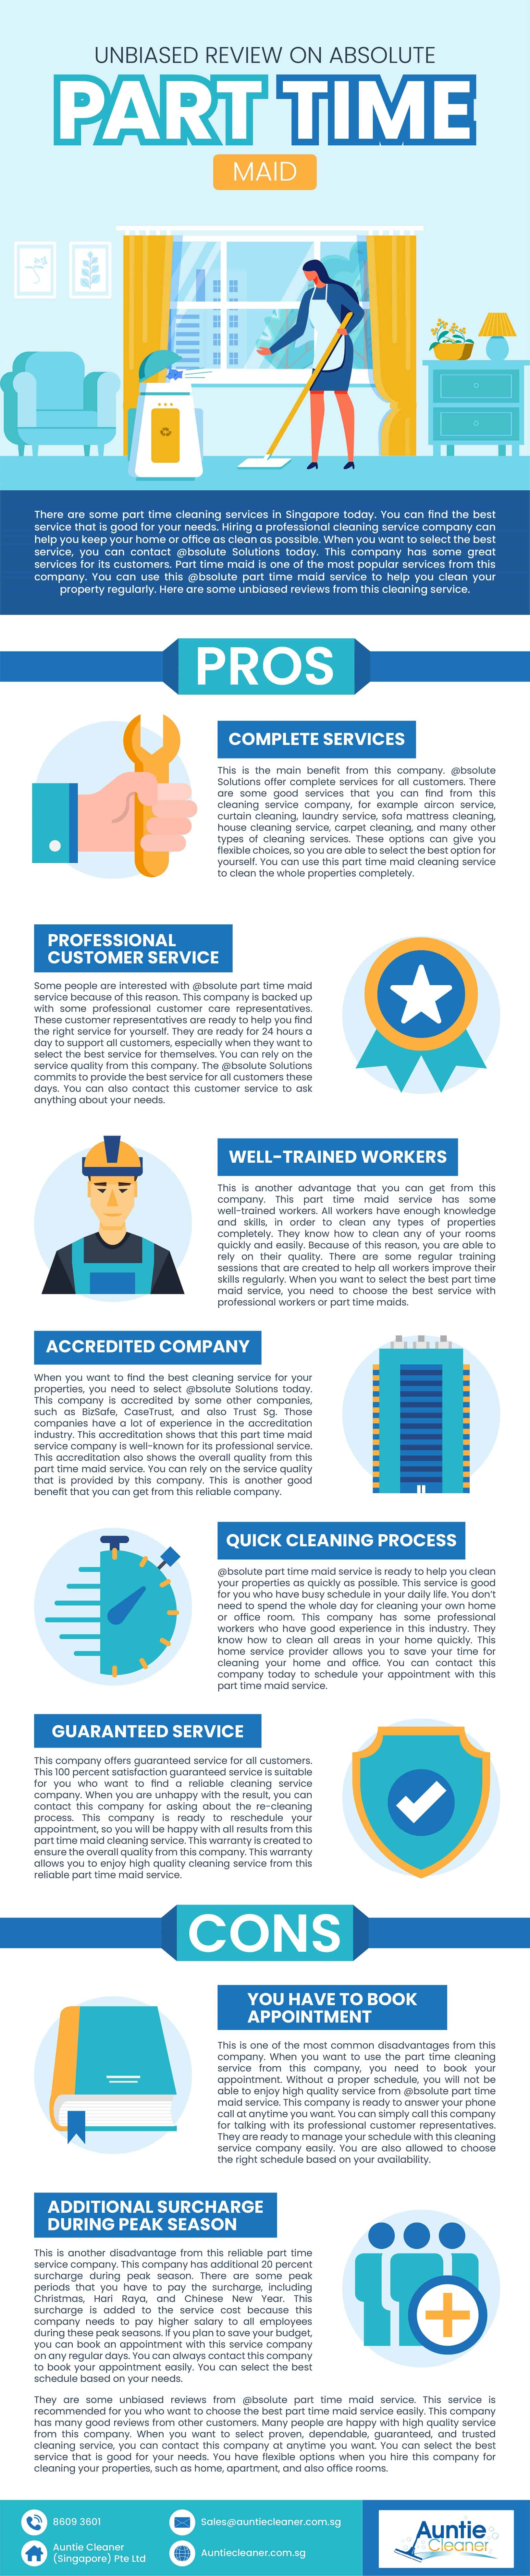 @bsolute-Part-Time-Maid-Review-Infographic